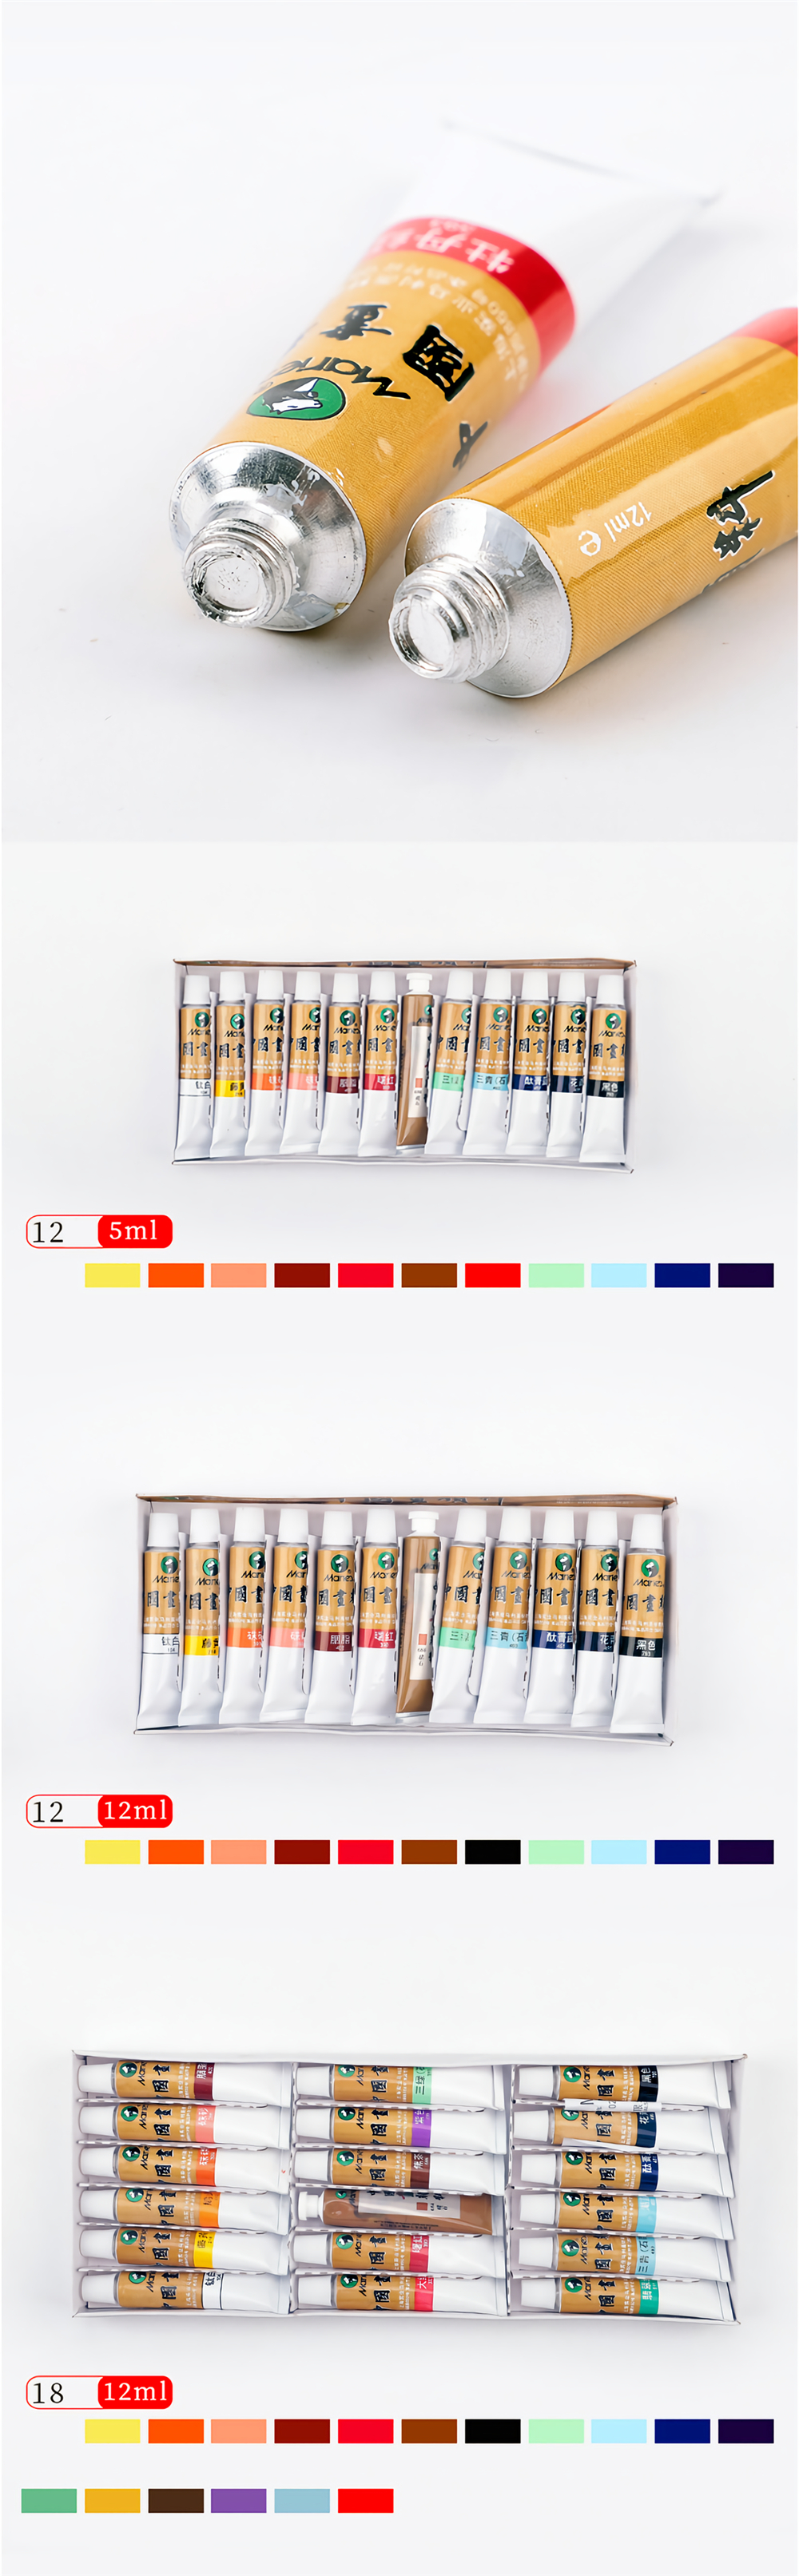 Maries-182436-Colors-Watercolor-Paint-Set-Oil-Painting-Pigment-School-Art-Drawing-Supplies-Profesion-1540689-4